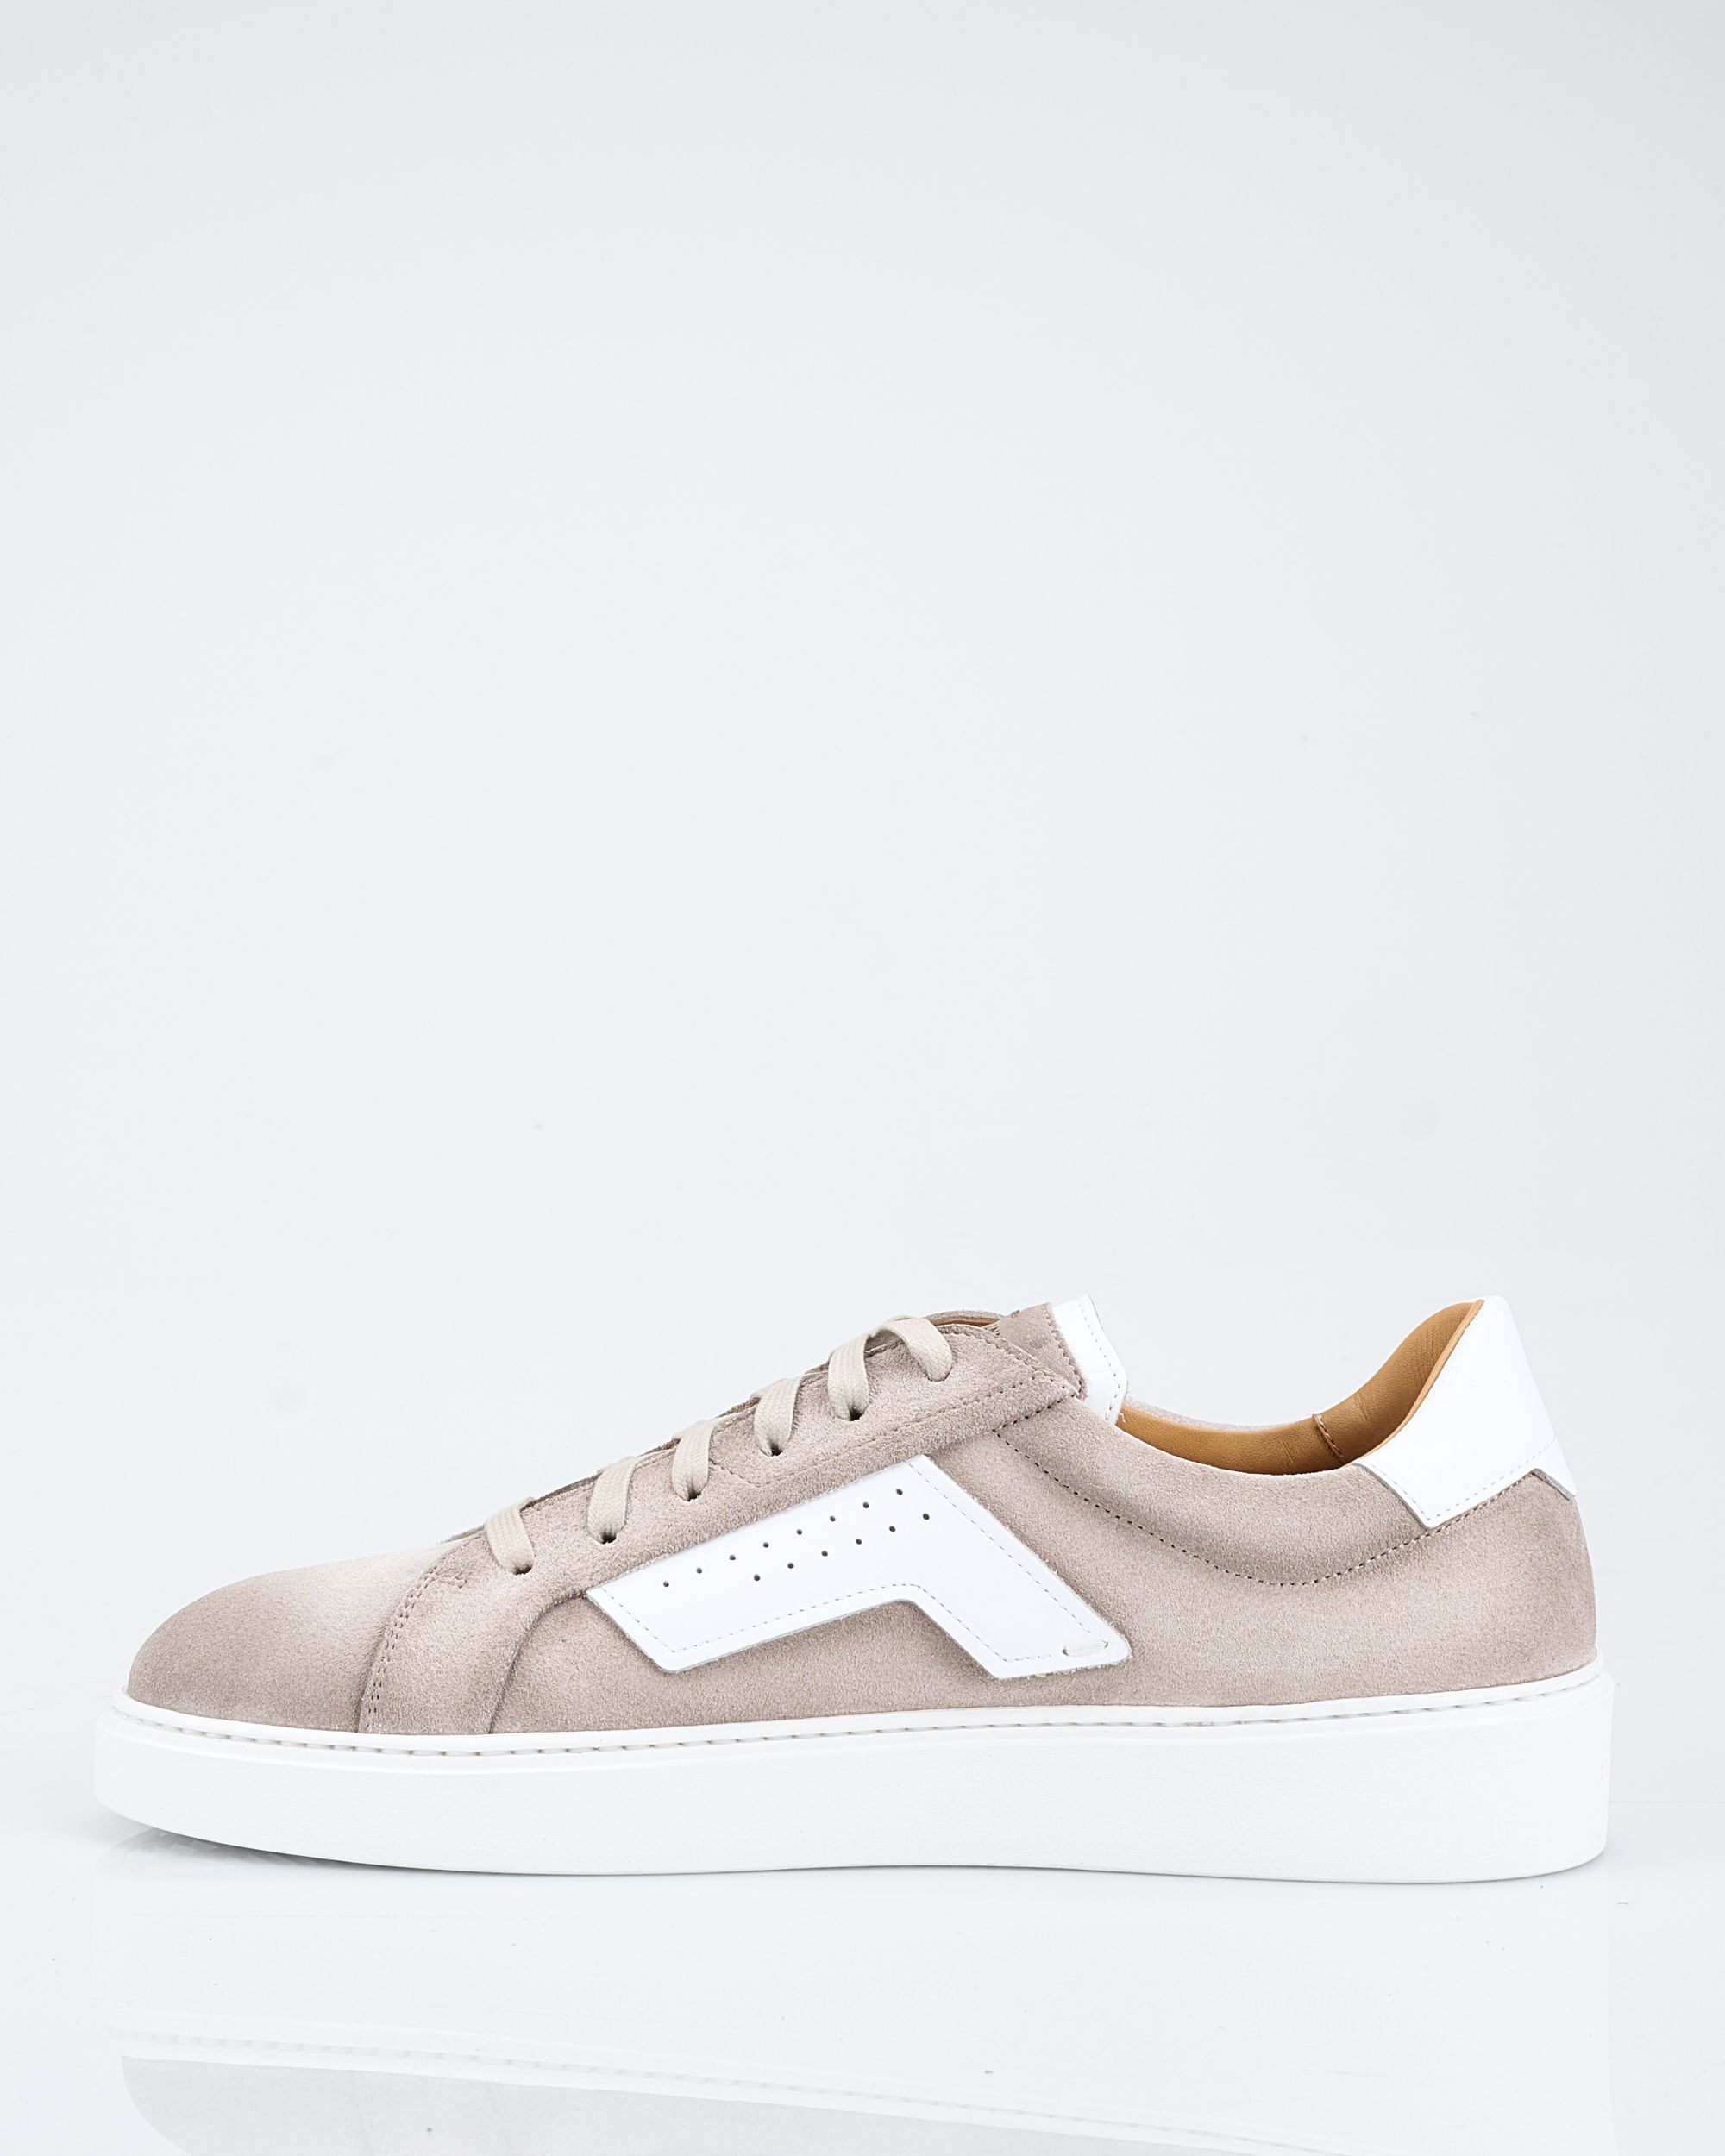 Magnanni Sneakers Beige 091970-001-42